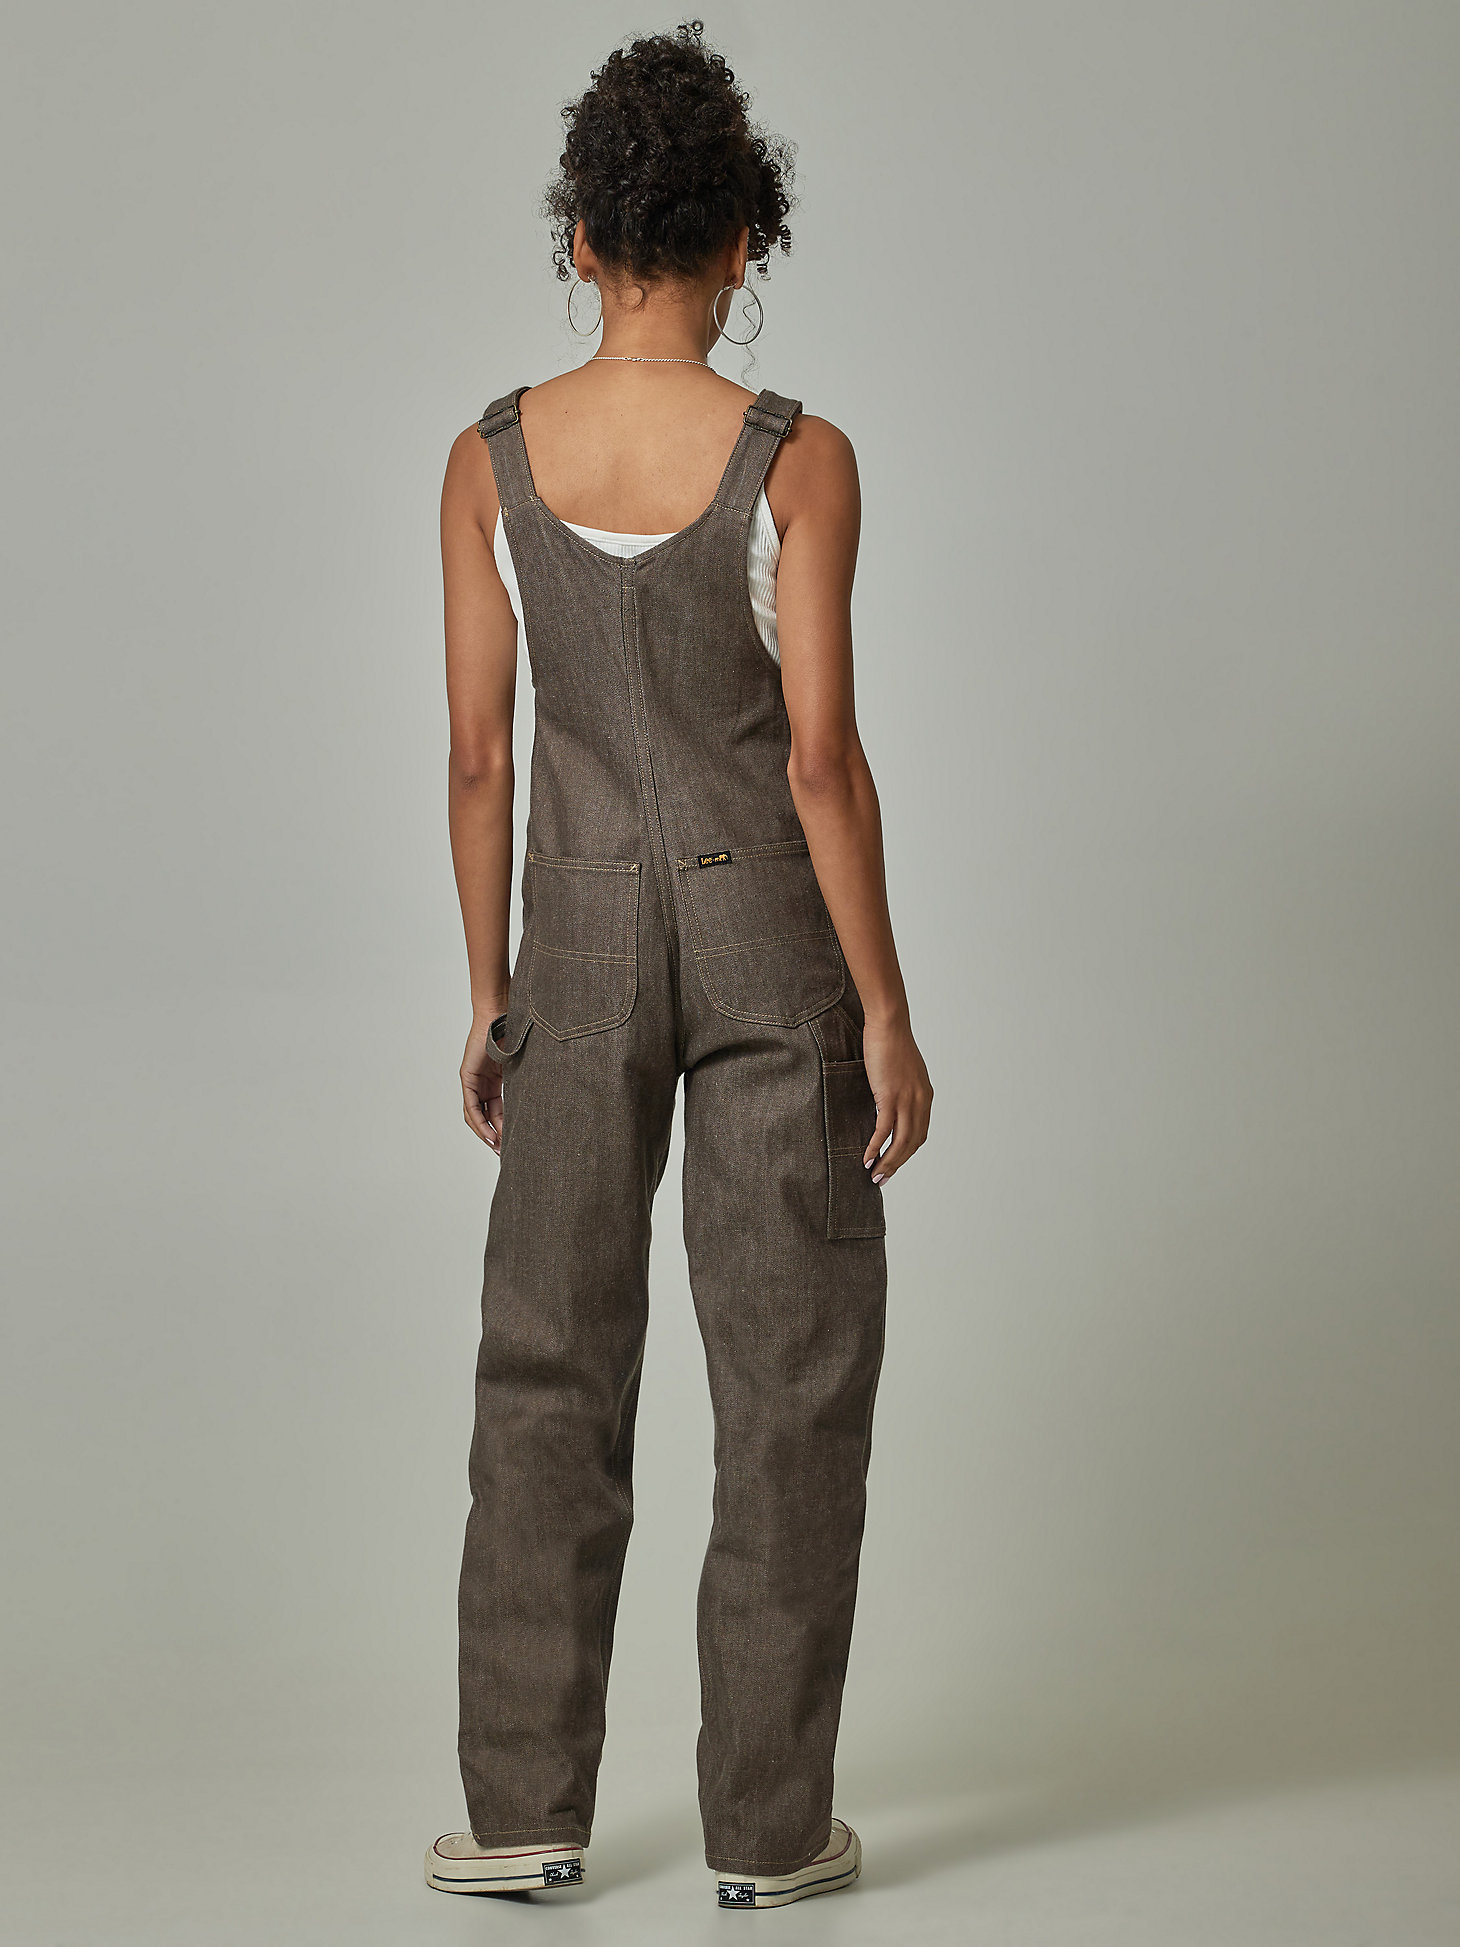 Lee® x The Brooklyn Circus® Whizit Overall in Brown alternative view 1